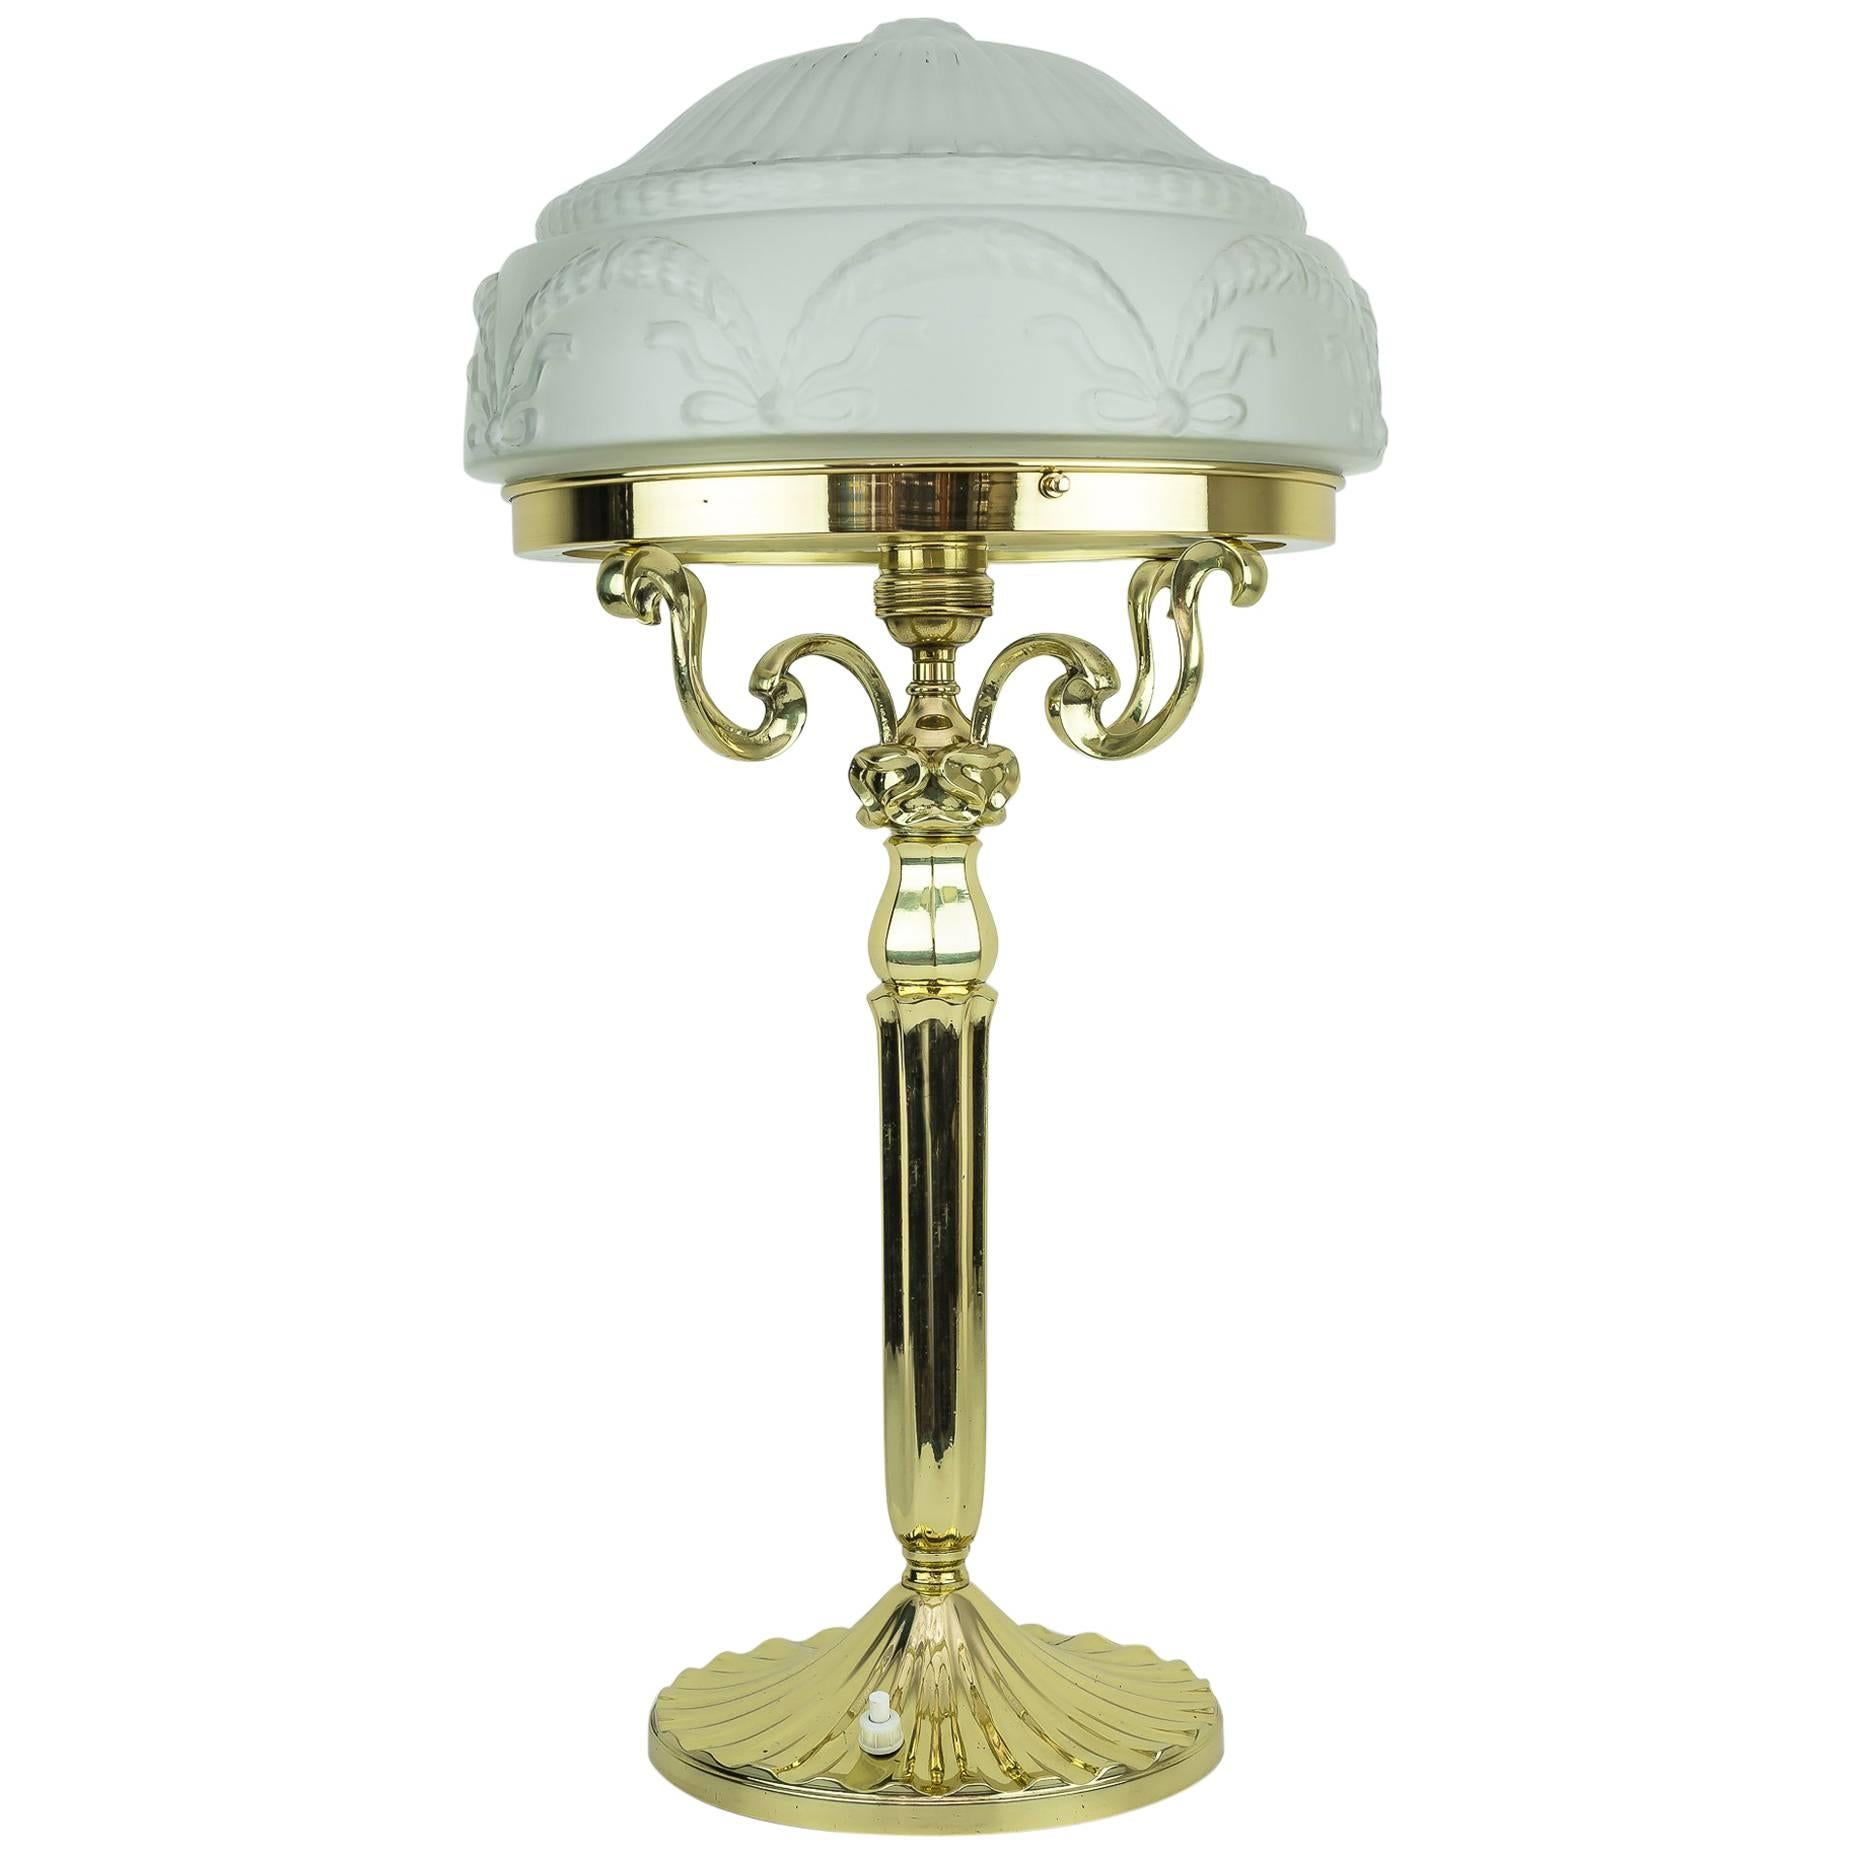 Jugendst Table Lamp, circa 1908